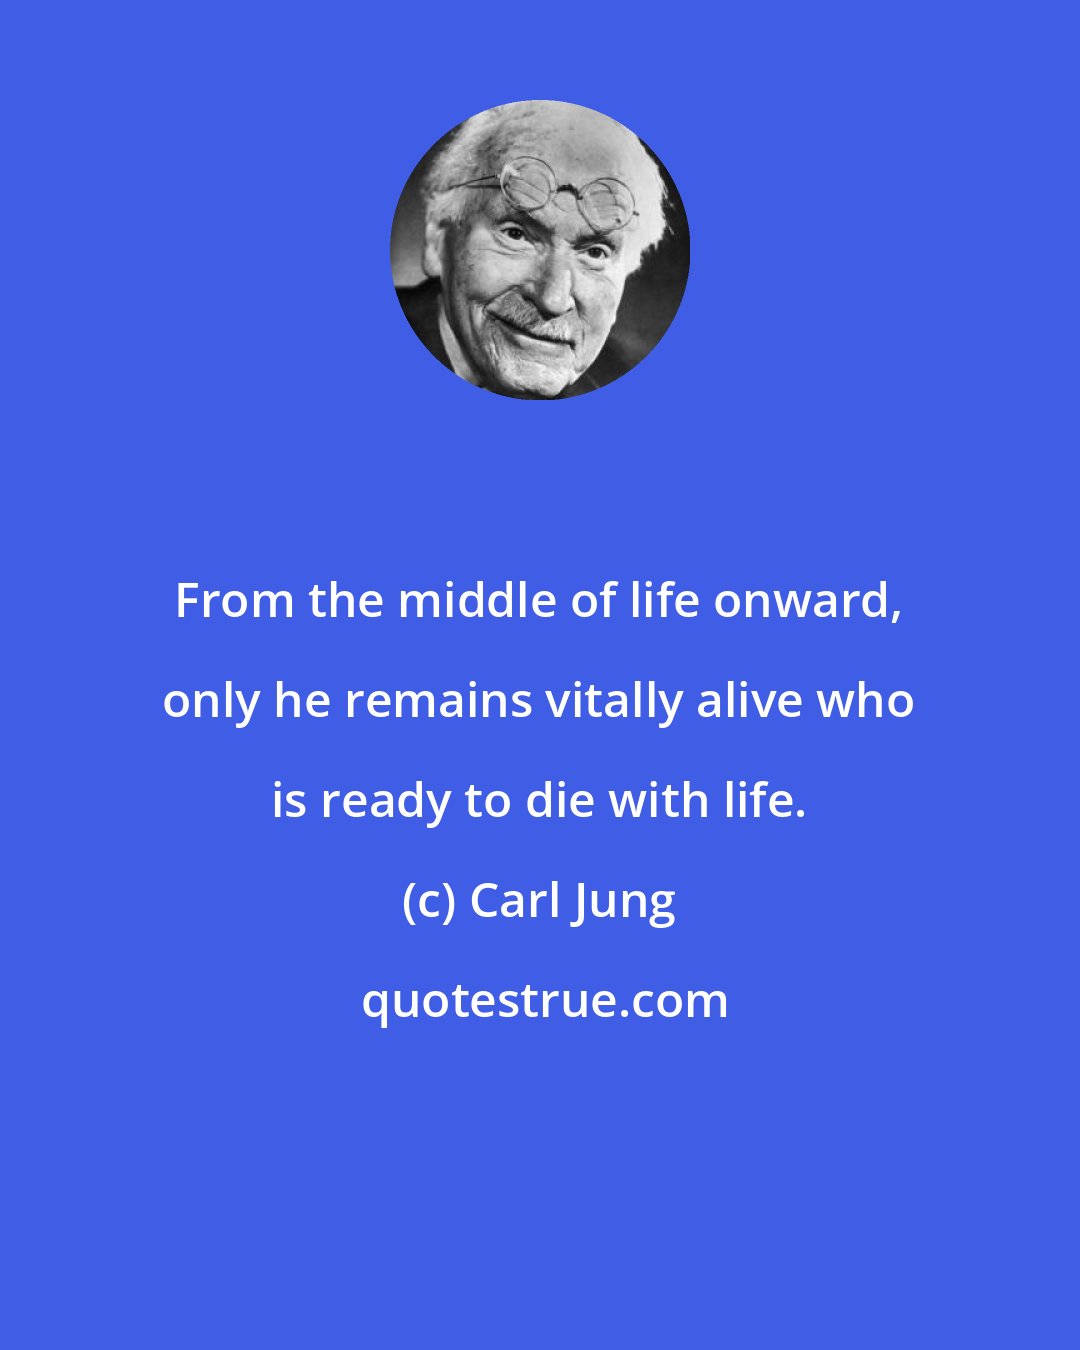 Carl Jung: From the middle of life onward, only he remains vitally alive who is ready to die with life.